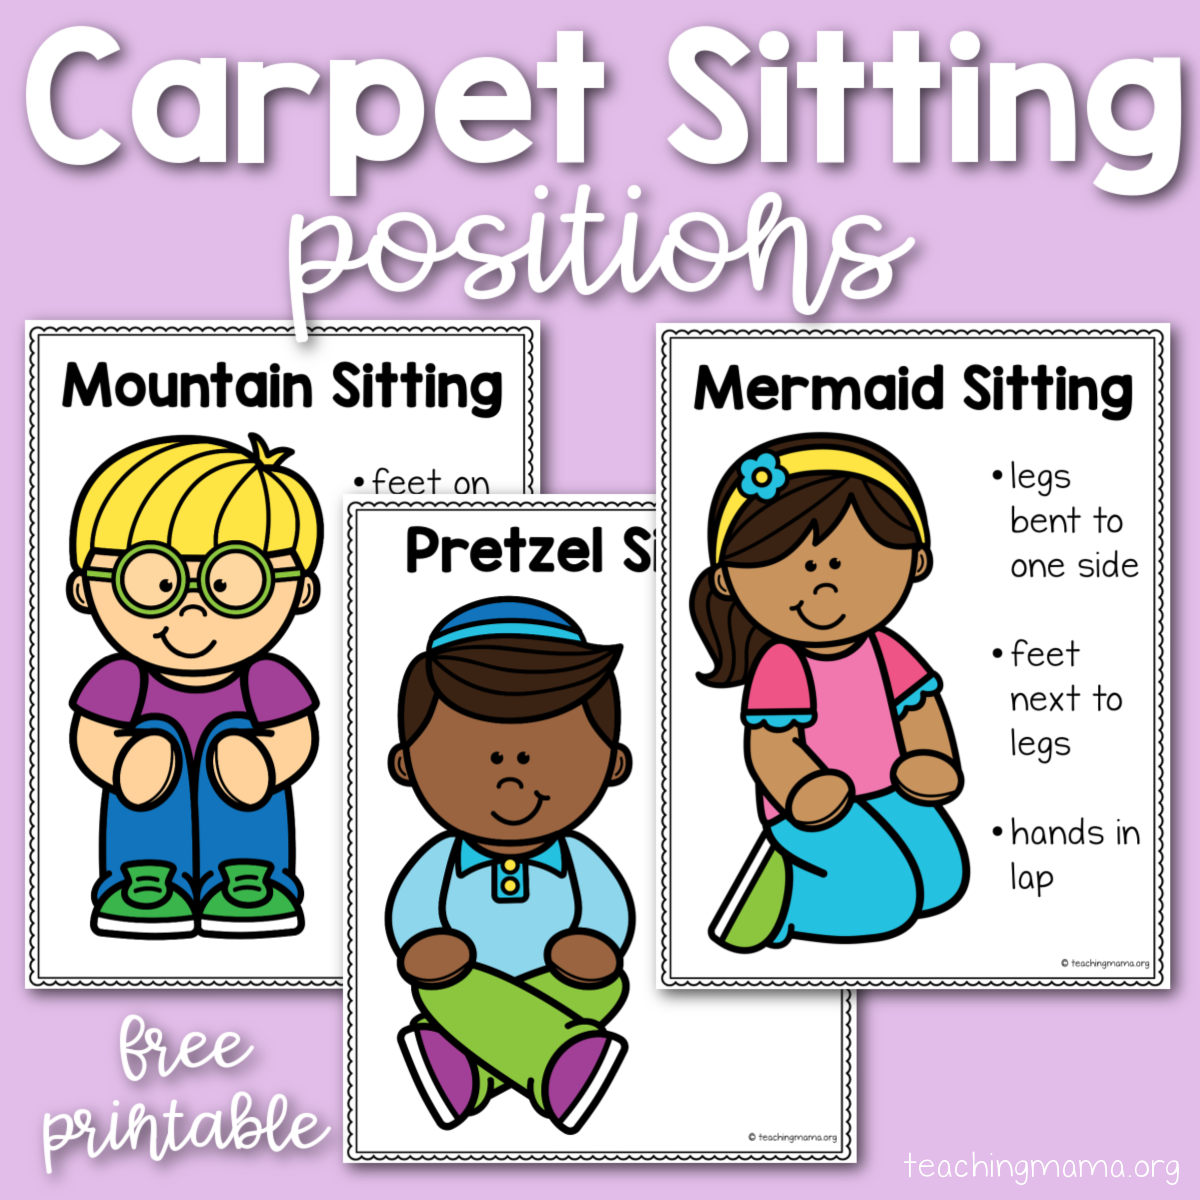 What is W-Sitting & How to Prevent it? | Child Development